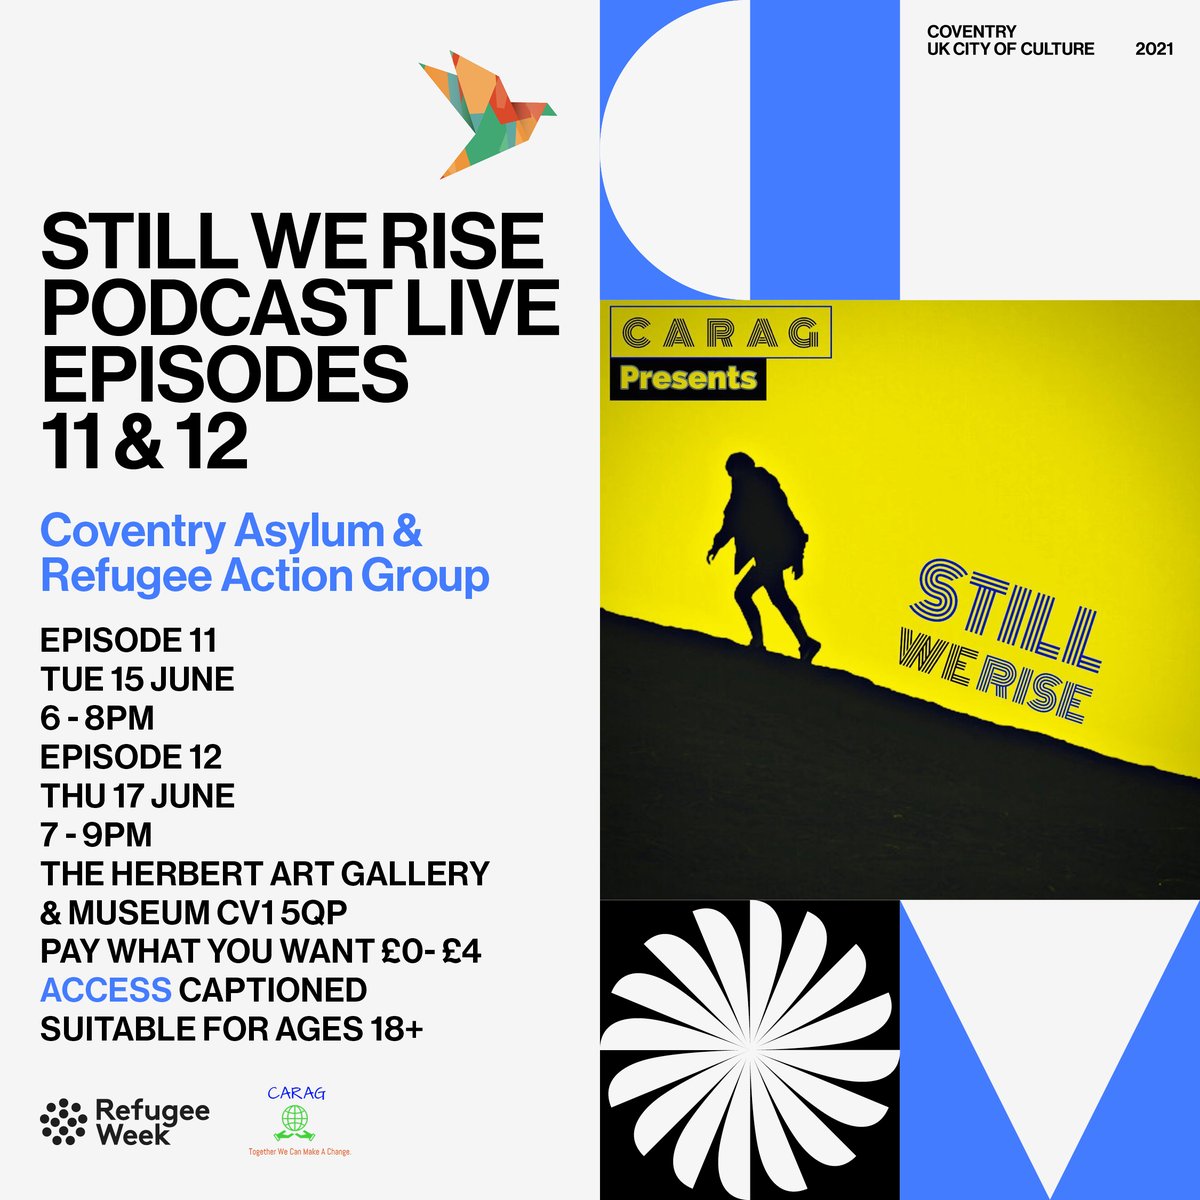 we have sold out on episode 11 for @caragcoventry still we rise podcast!! If you missed out on a ticket book for Thursdays episode with @zarahsultana as guest. #RefugeeWeek2021 coventry2021.co.uk/what-s-on/stil… #Coventrywelcomes2021 #CoventryMoves #RefugeeWeek2021